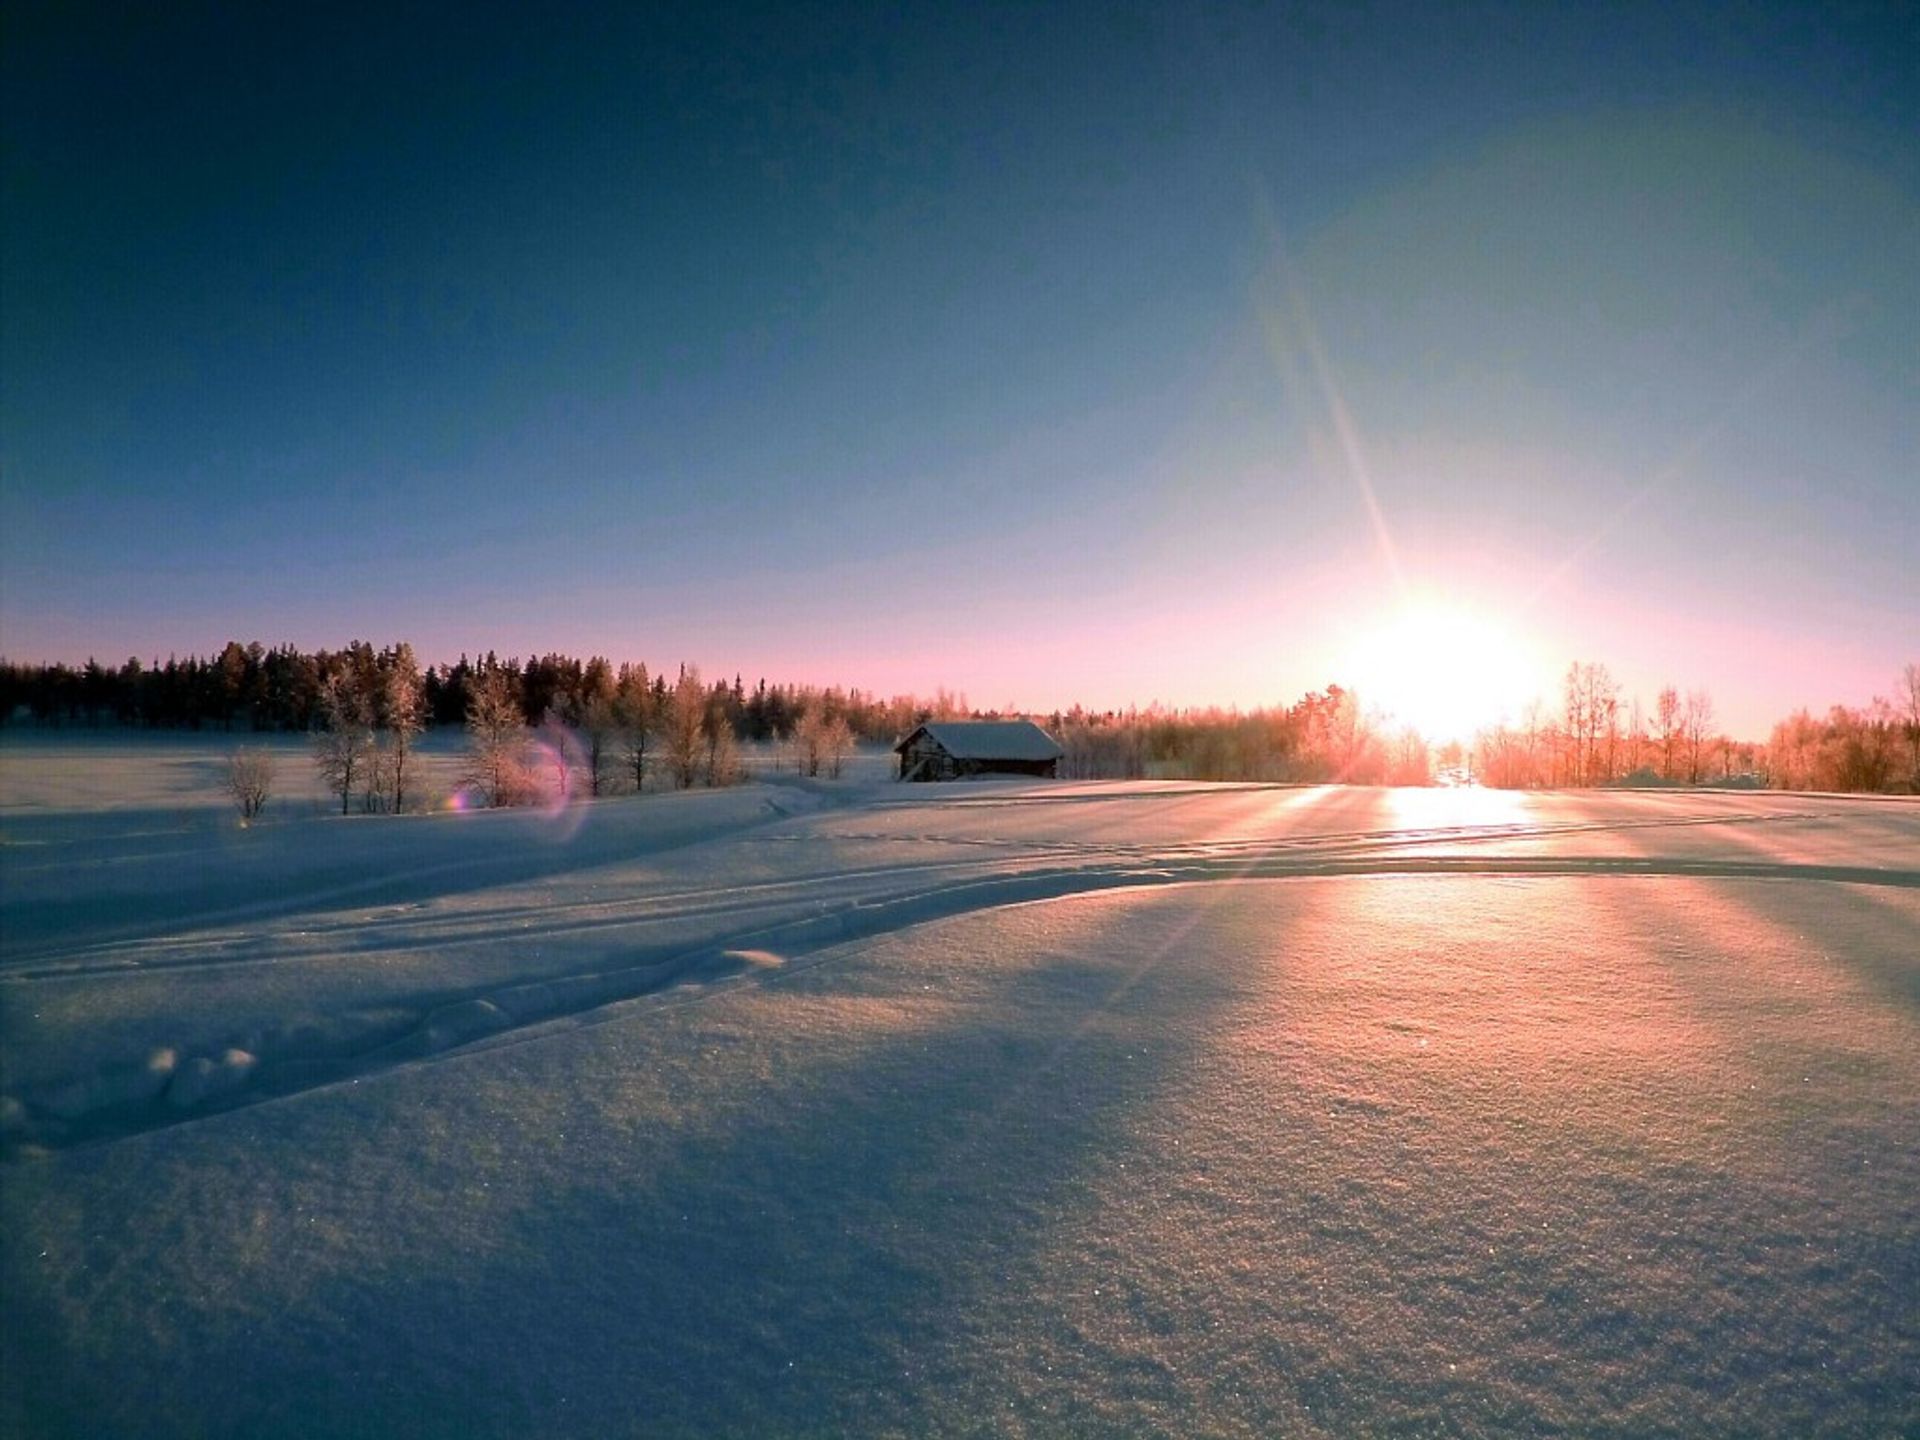 A landscape where the white snow is visible and the sun is on its way down behind the green forest.